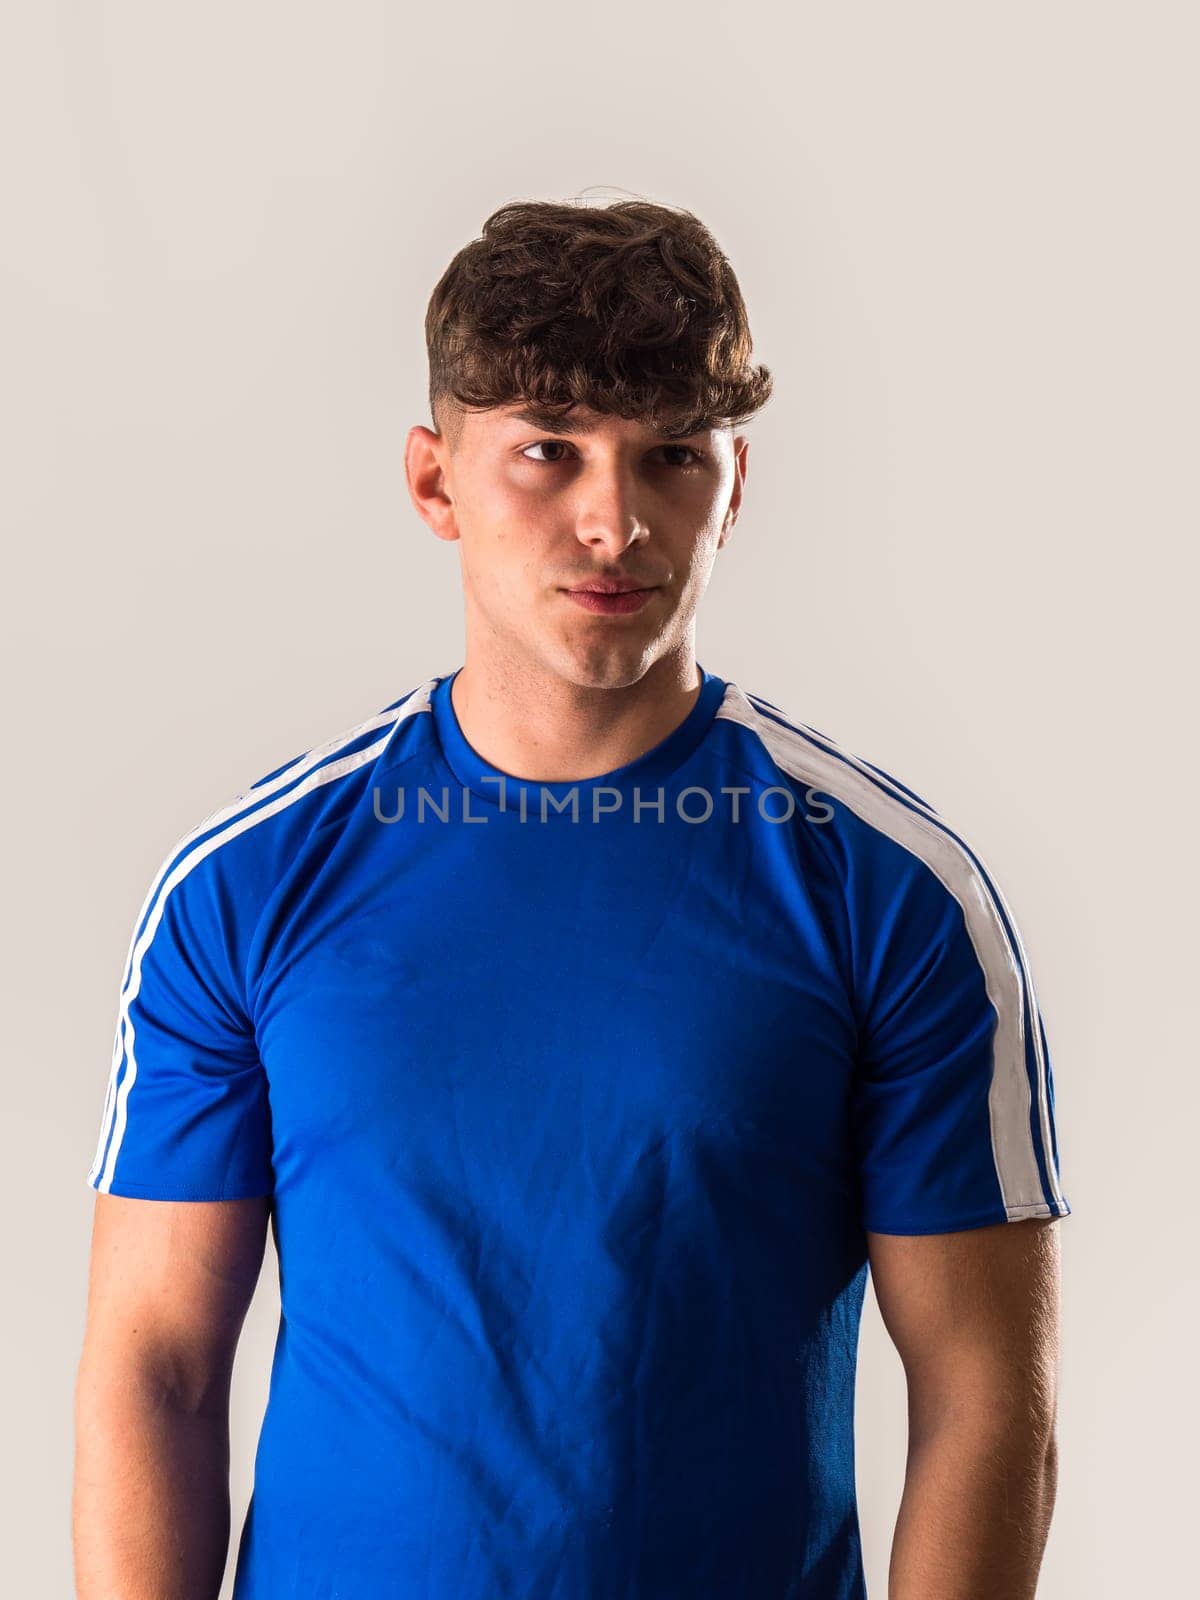 A young man in a blue soccer shirt posing for a picture. Soccer or football player in studio shot